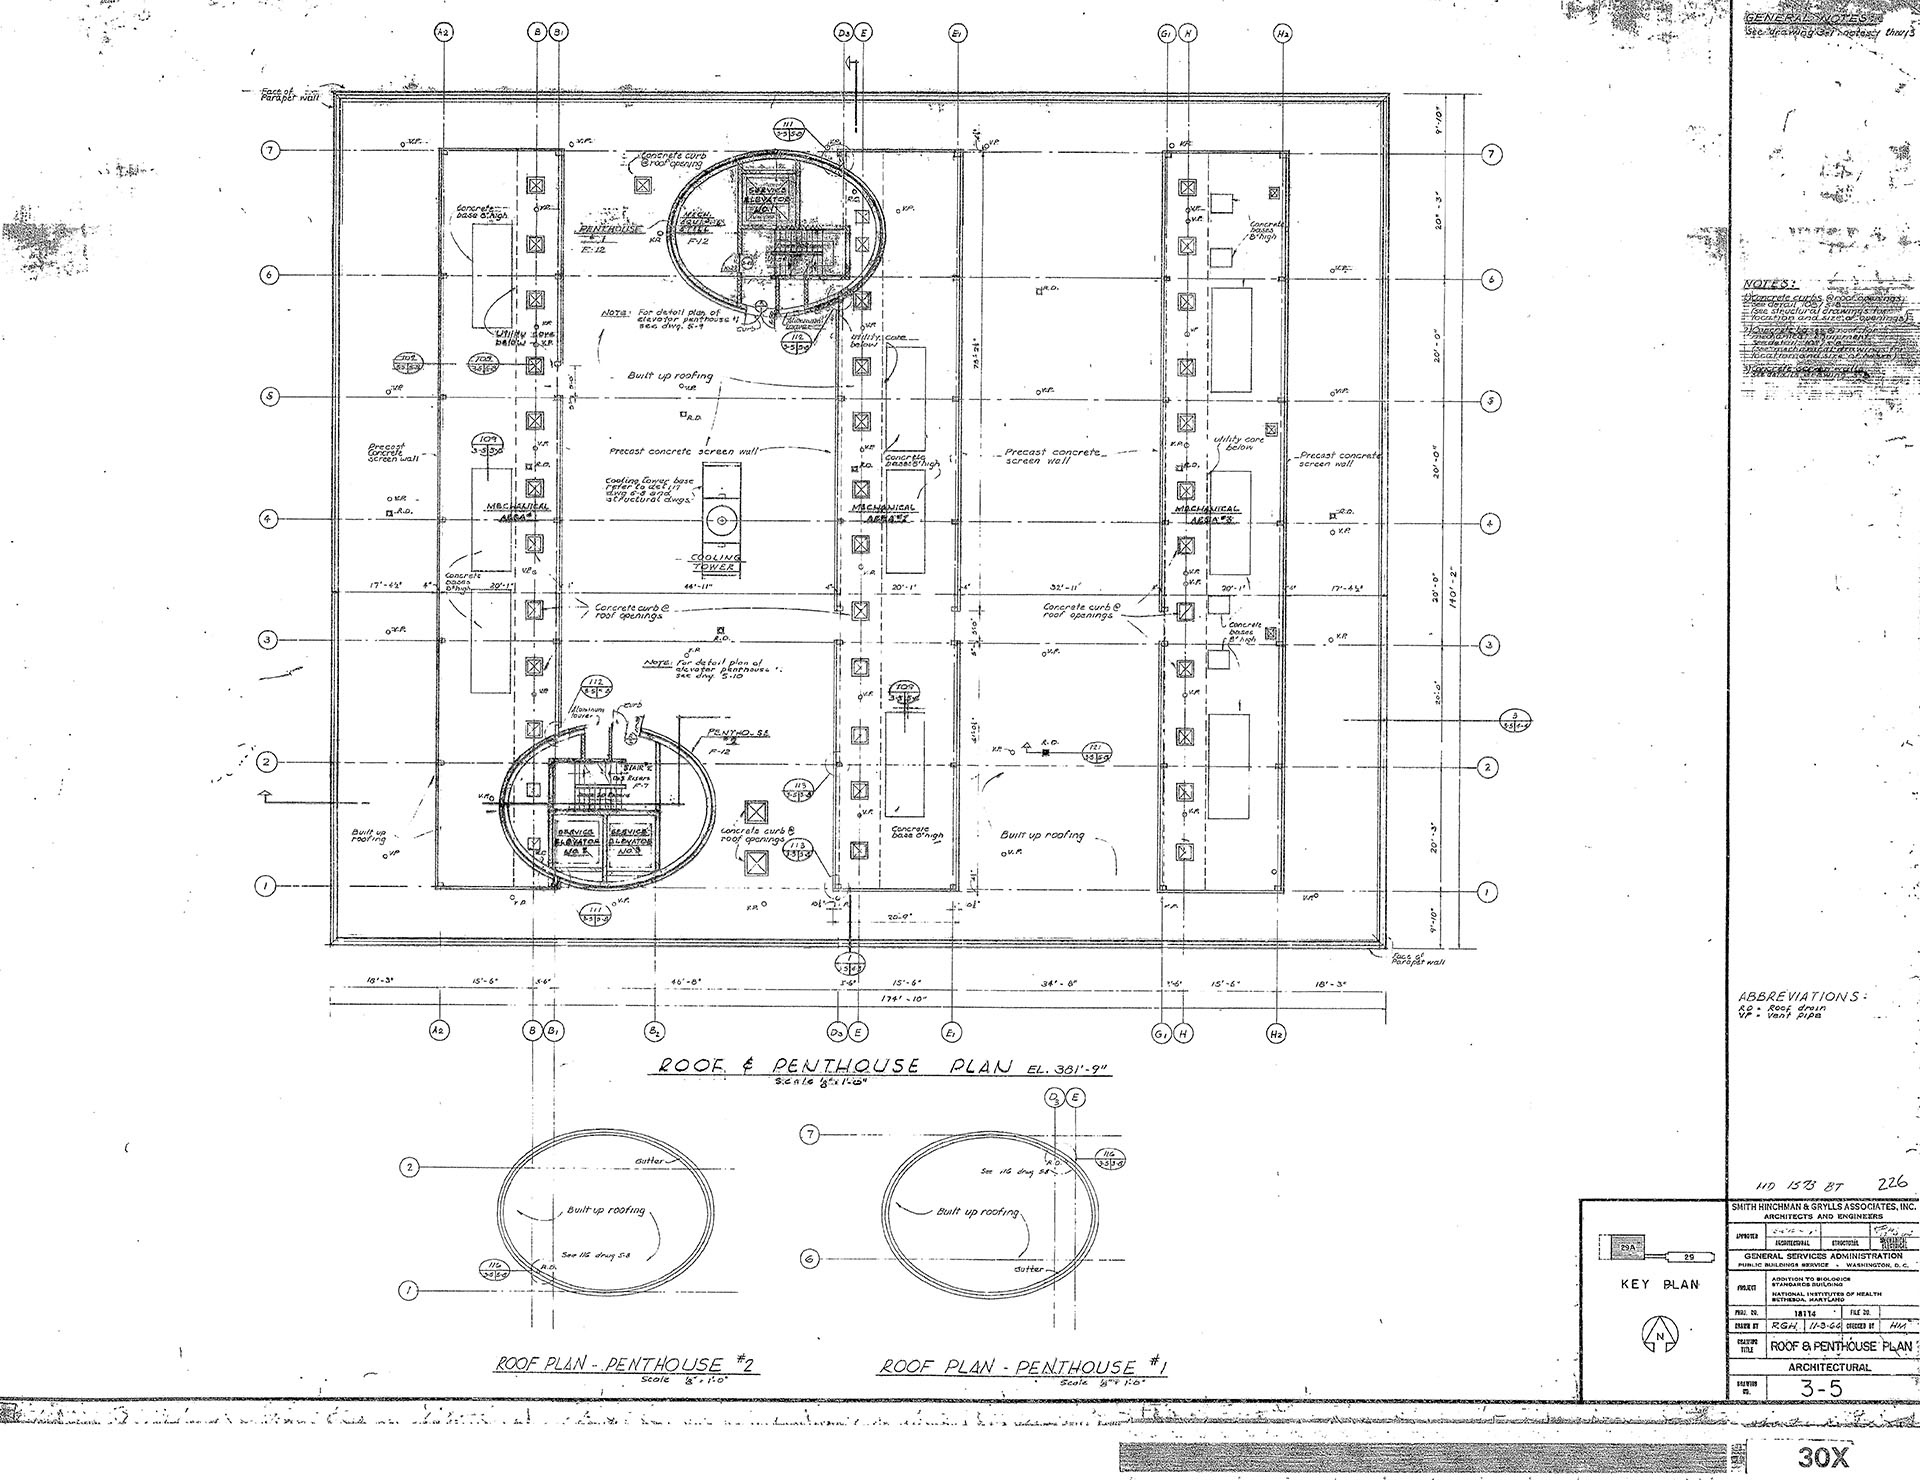 Roof and penthouse floor plan of Building 29A.